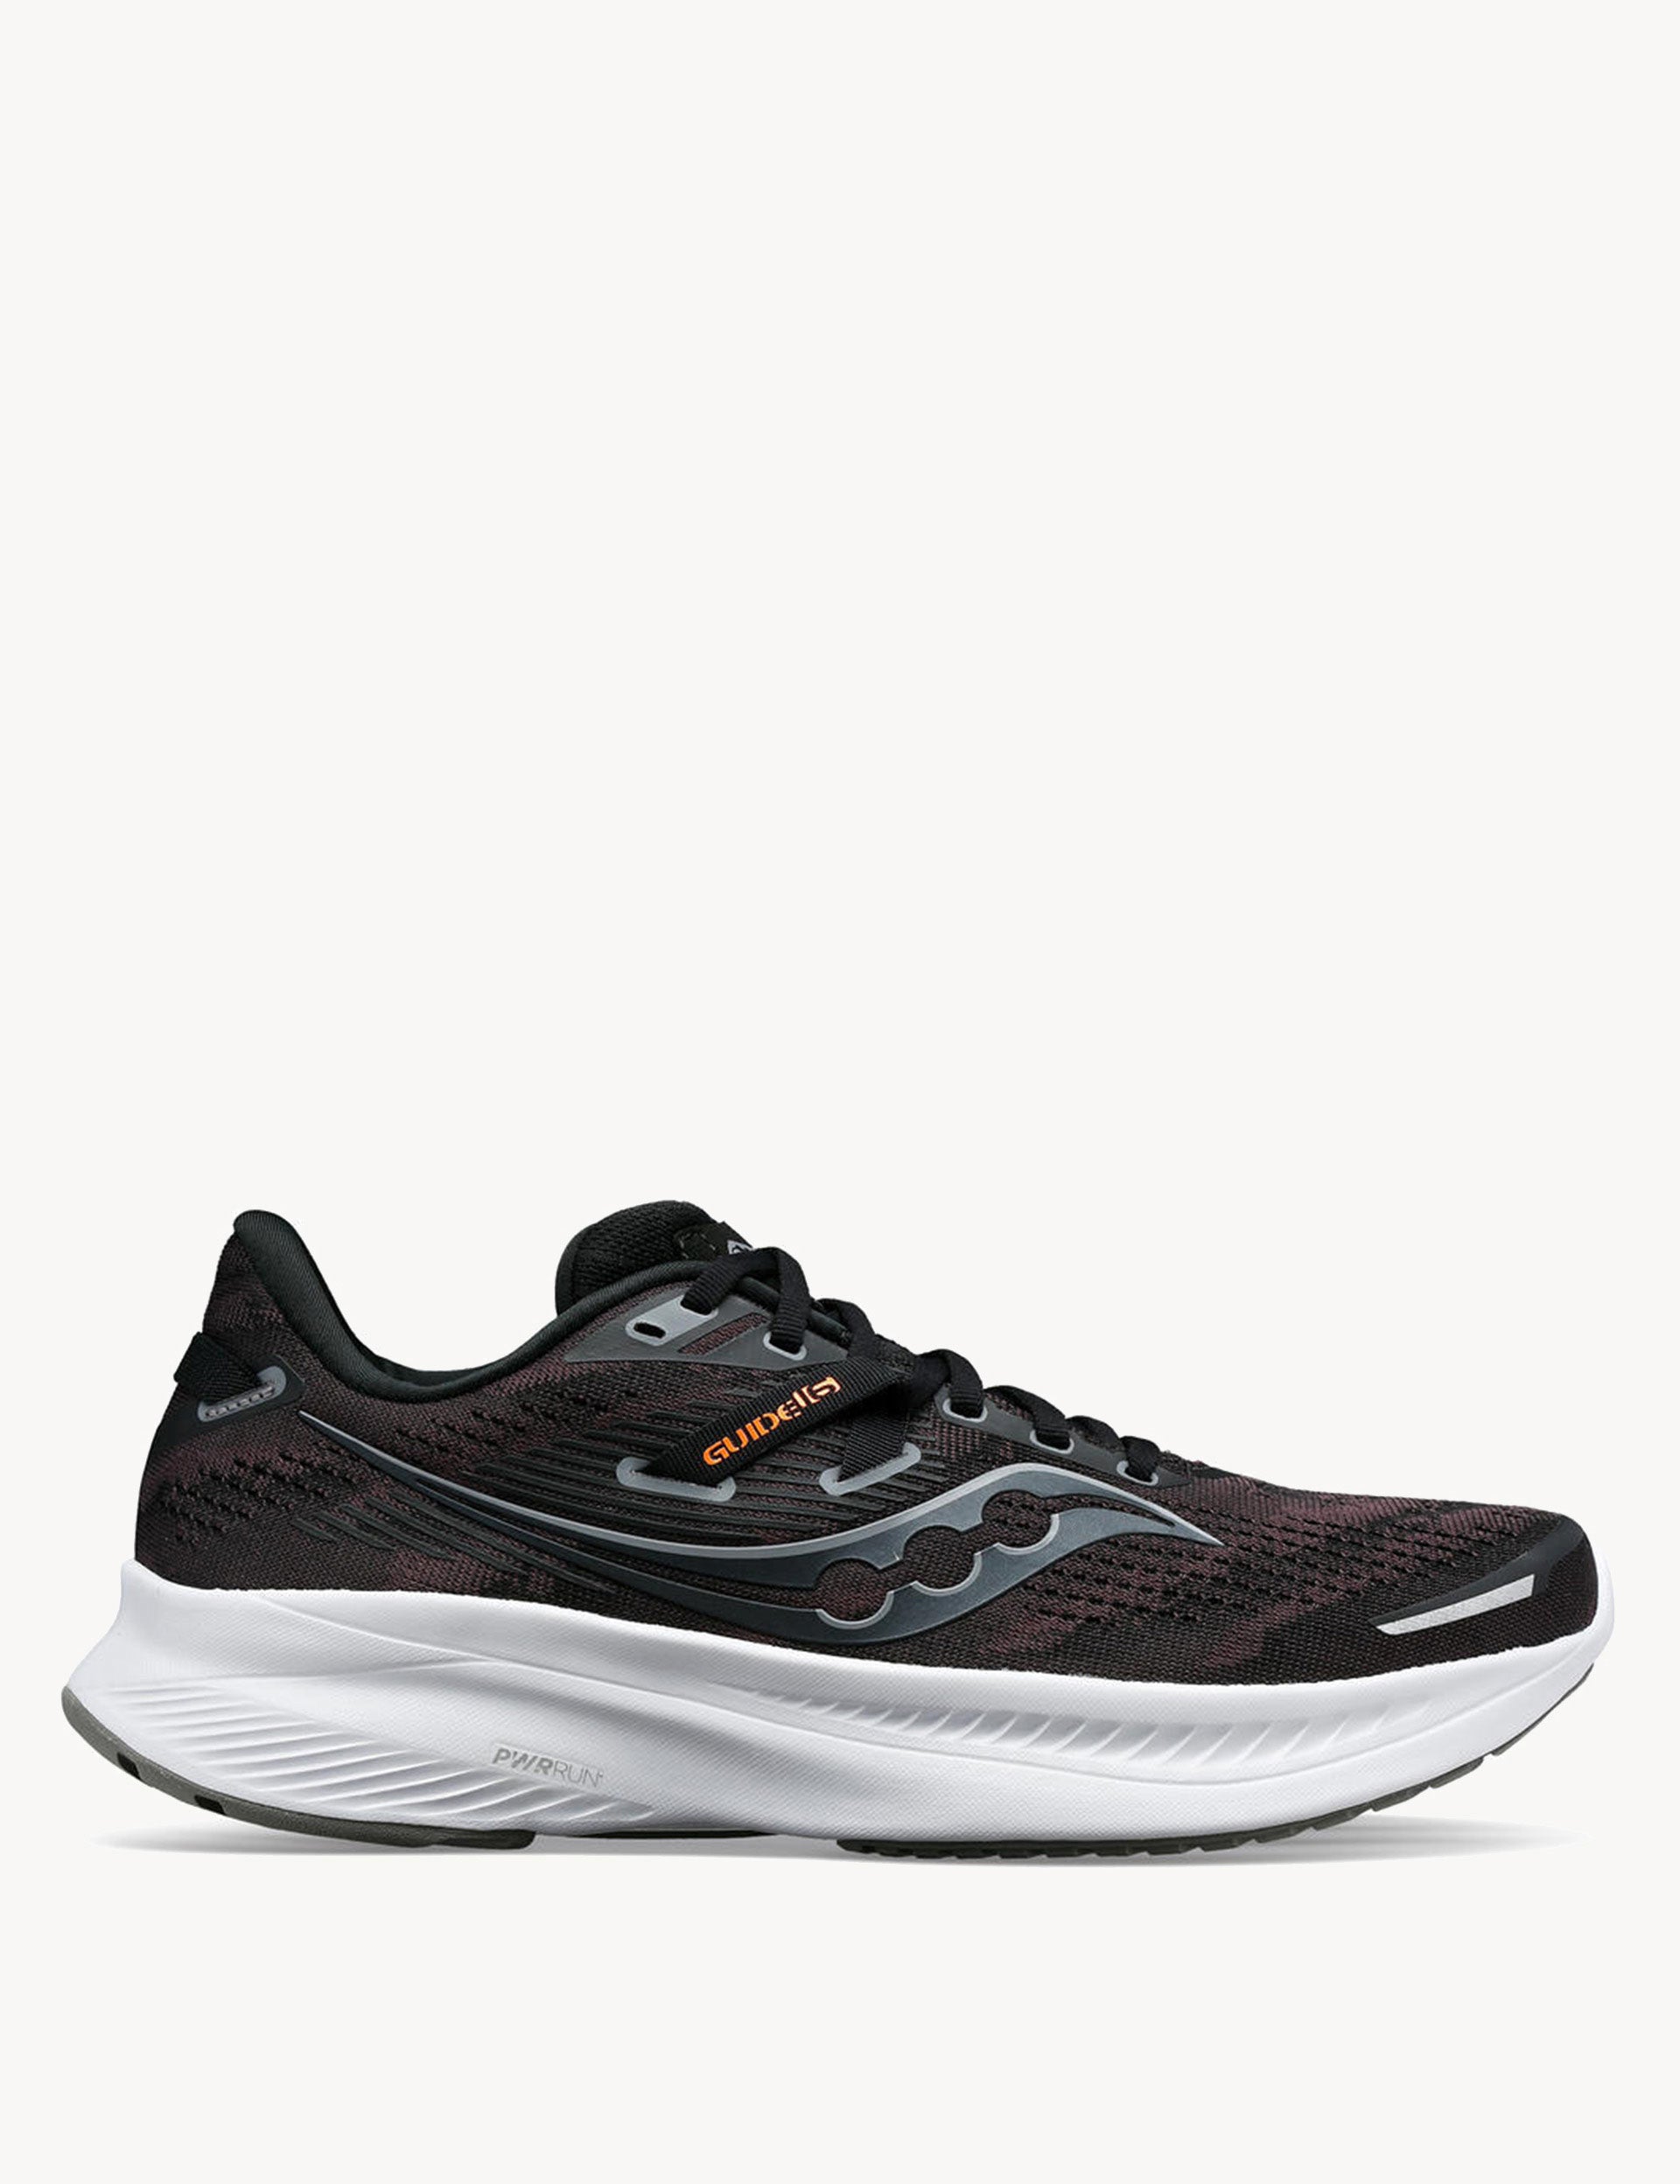 Saucony | Guide 16 - Black/White | The Sports Edit